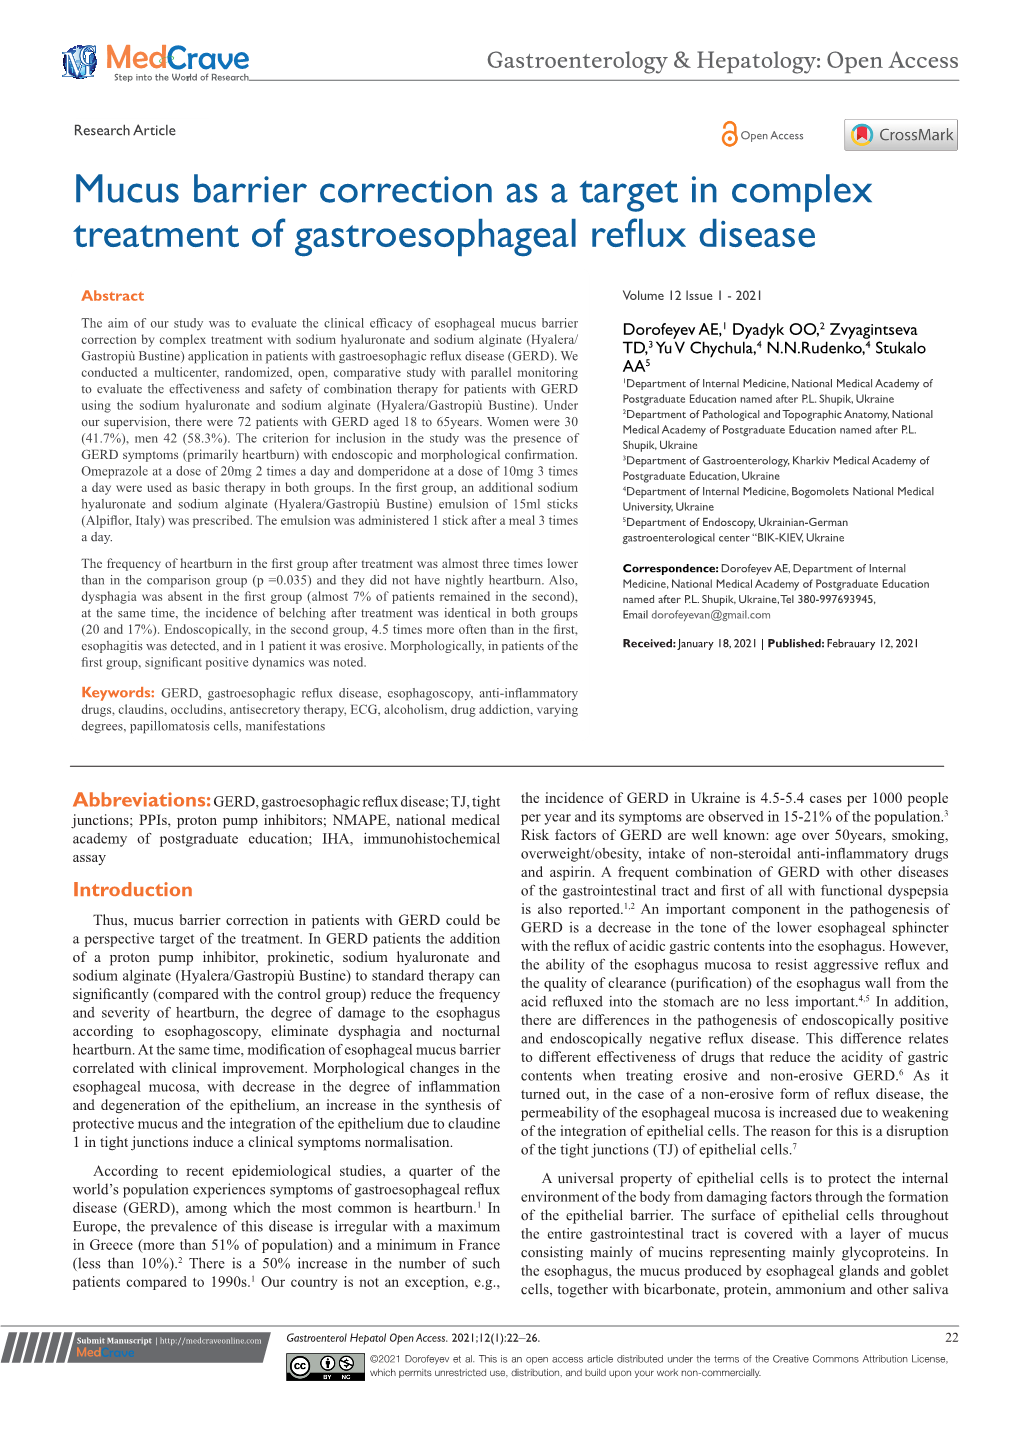 Mucus Barrier Correction As a Target in Complex Treatment of Gastroesophageal Reflux Disease